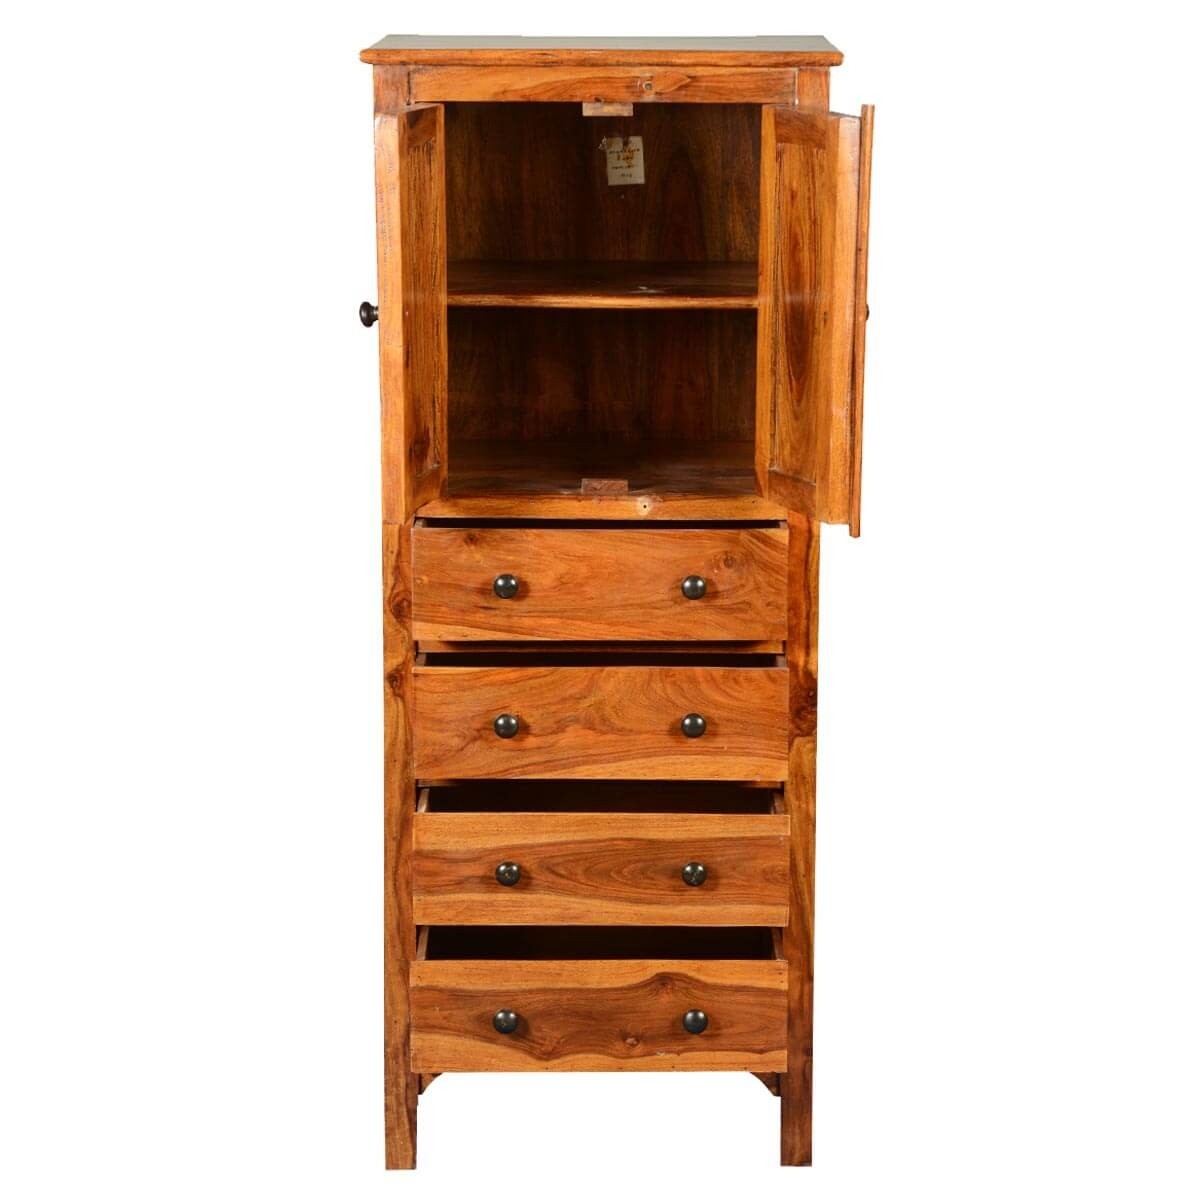 Rustic solid wood 56 tall storage cabinet w 4 drawers